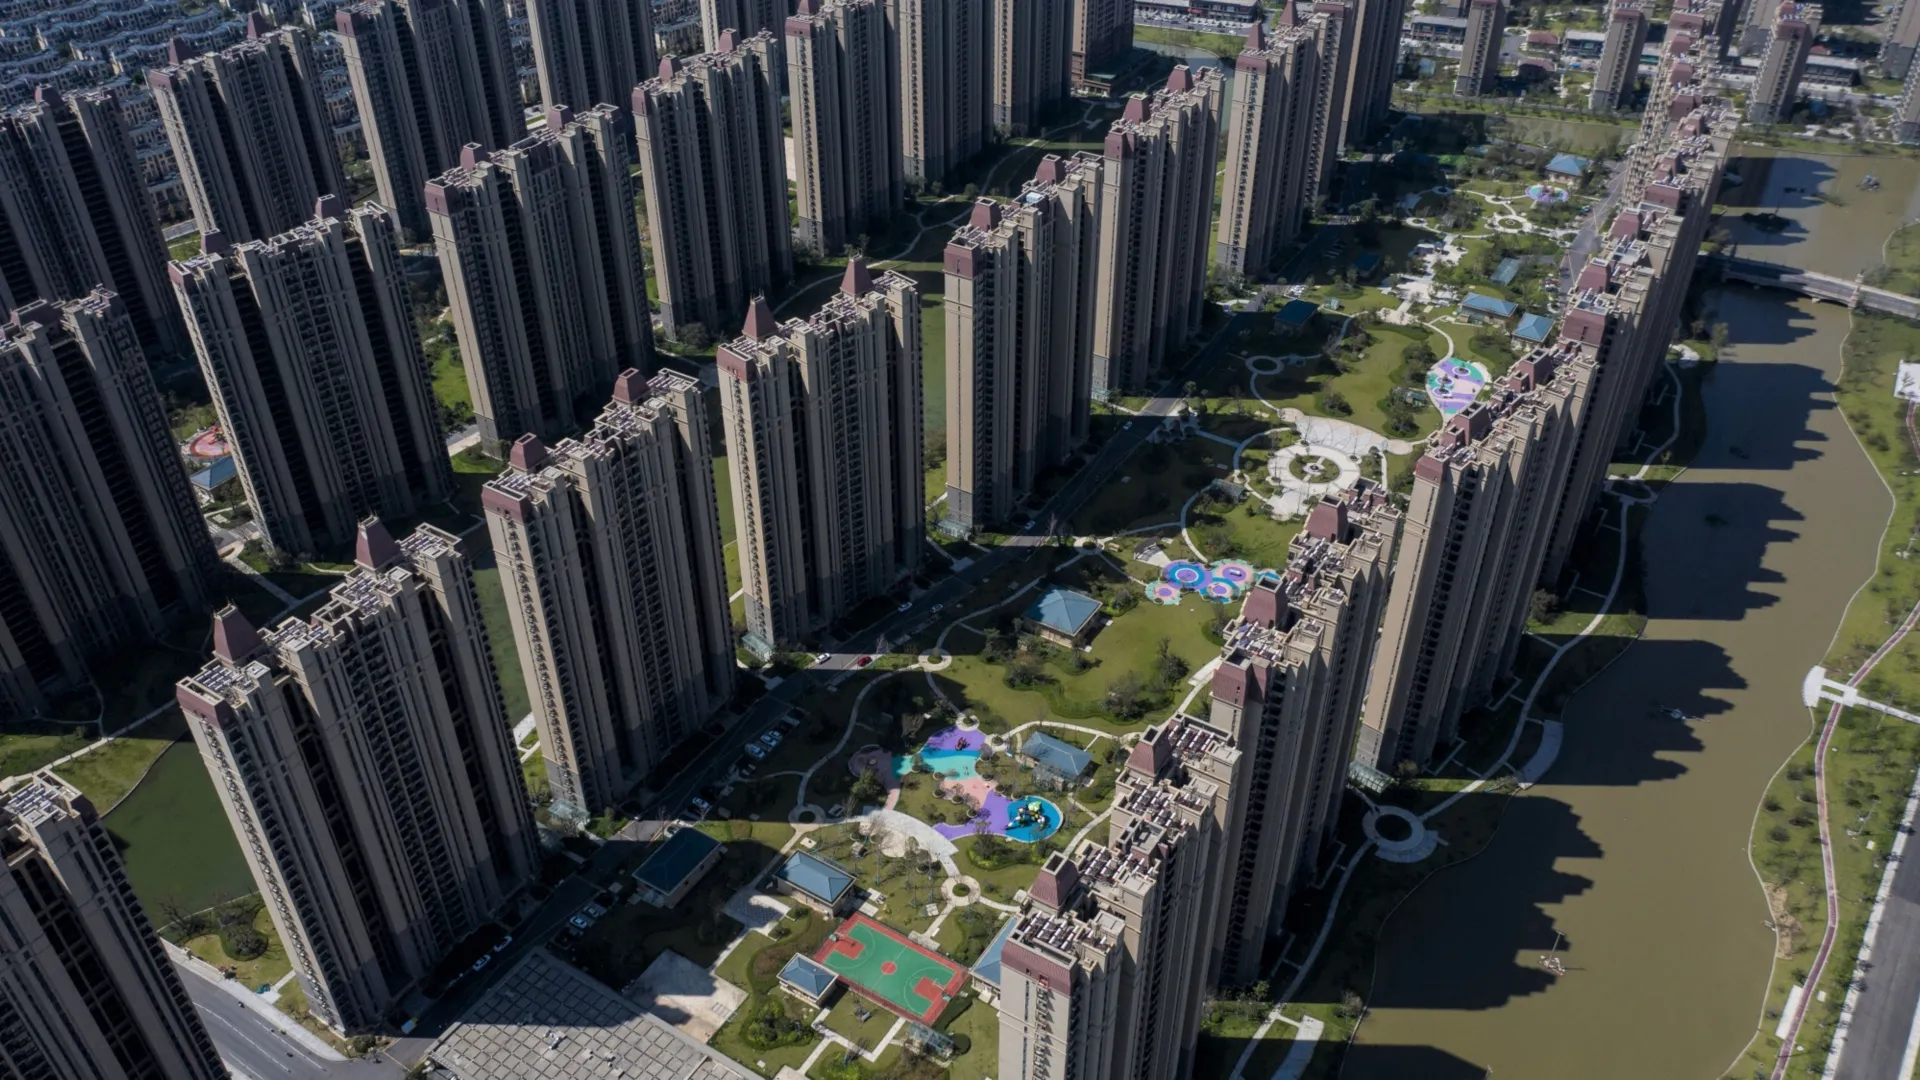 Amidst the arrival of China's home price slide, concerns escalate over the impact on the real estate market. 

Image Source: Al-Jazeera 